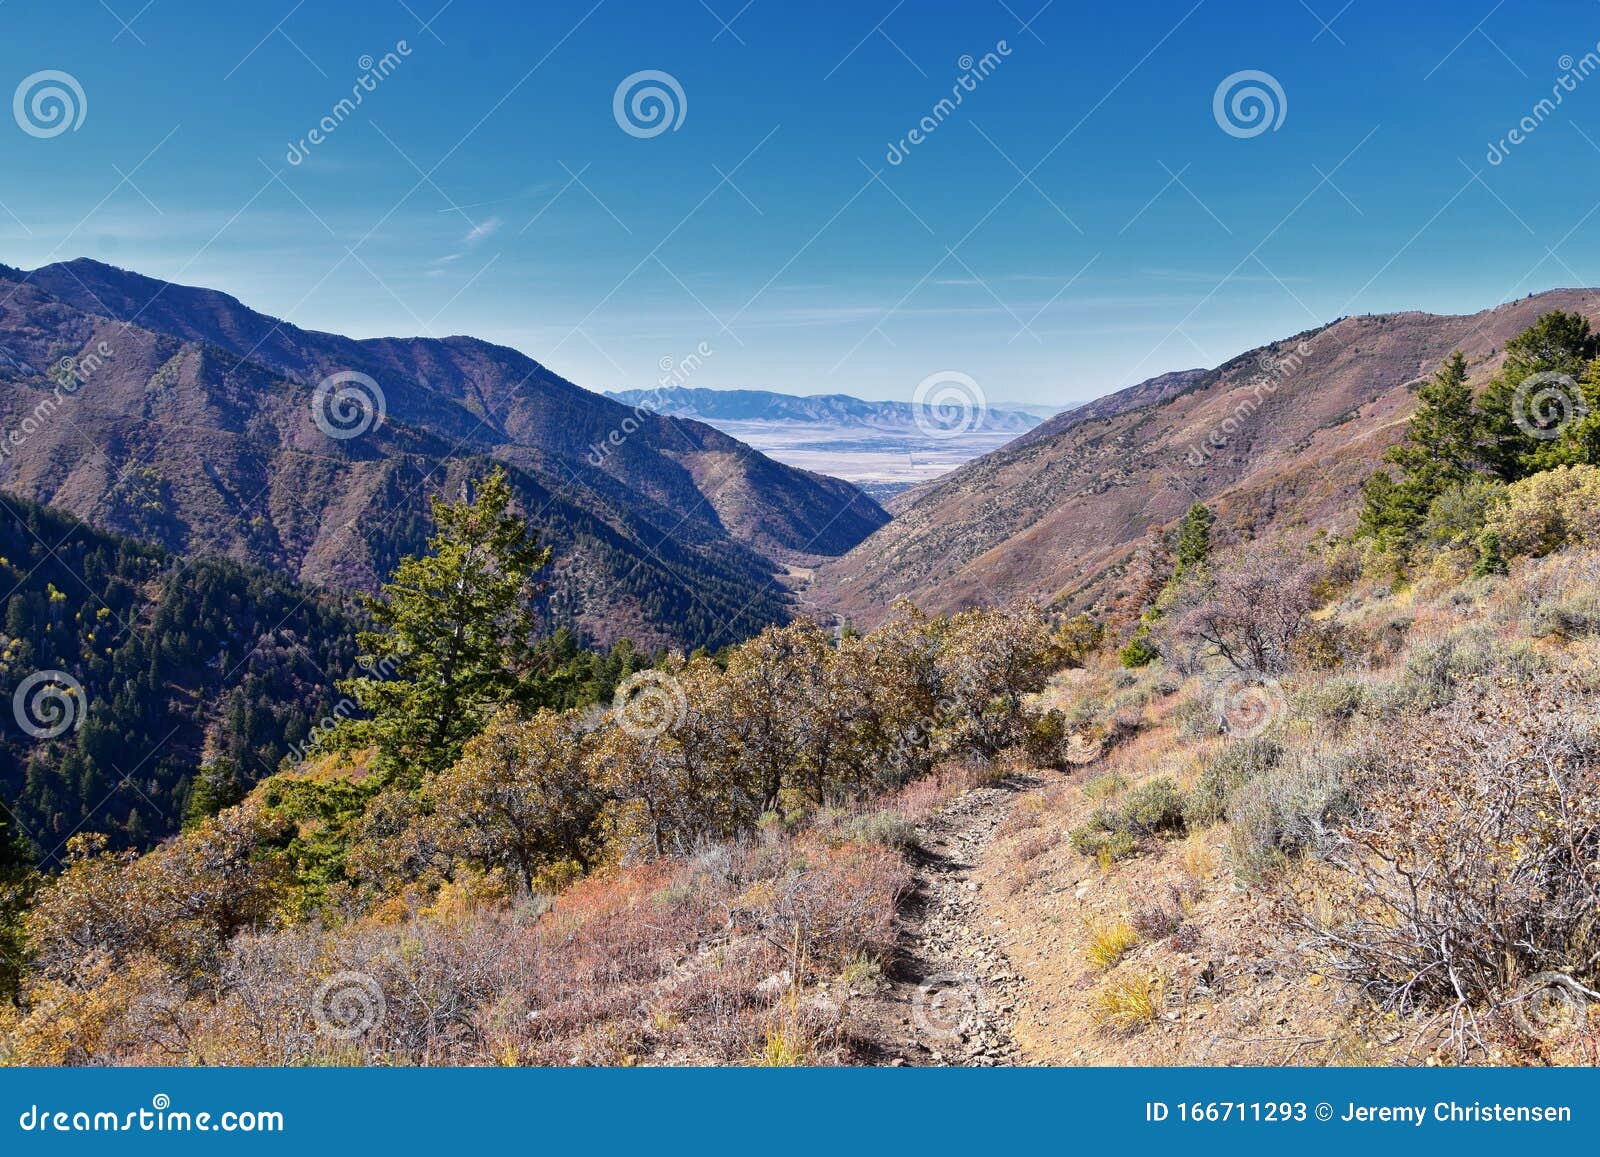 Butterfield Canyon Hiking Path Views of the Oquirrh Range Along the